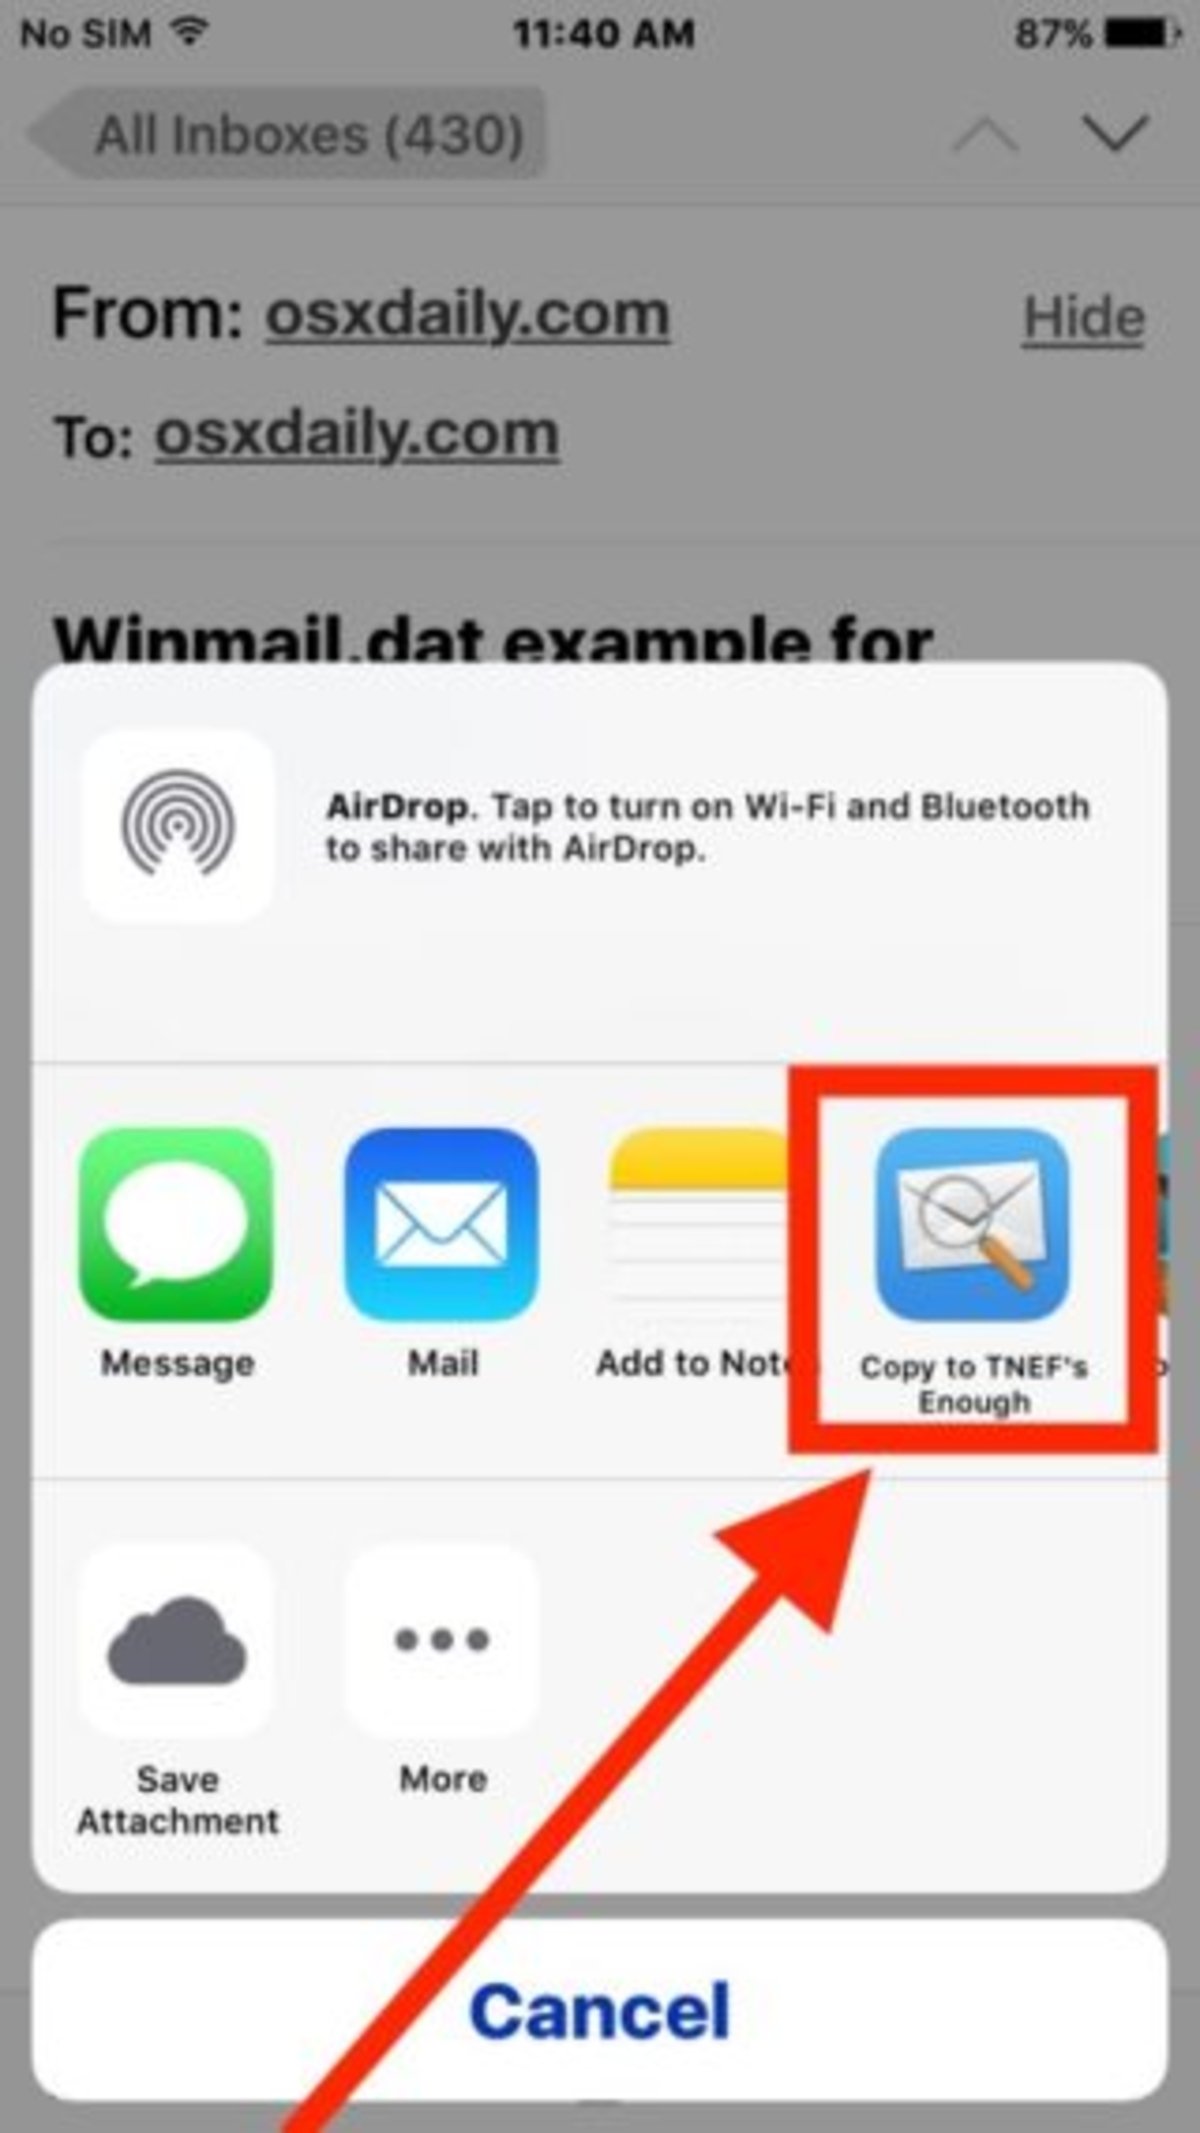 open-winmail-dat-file-iphone-2-450x800